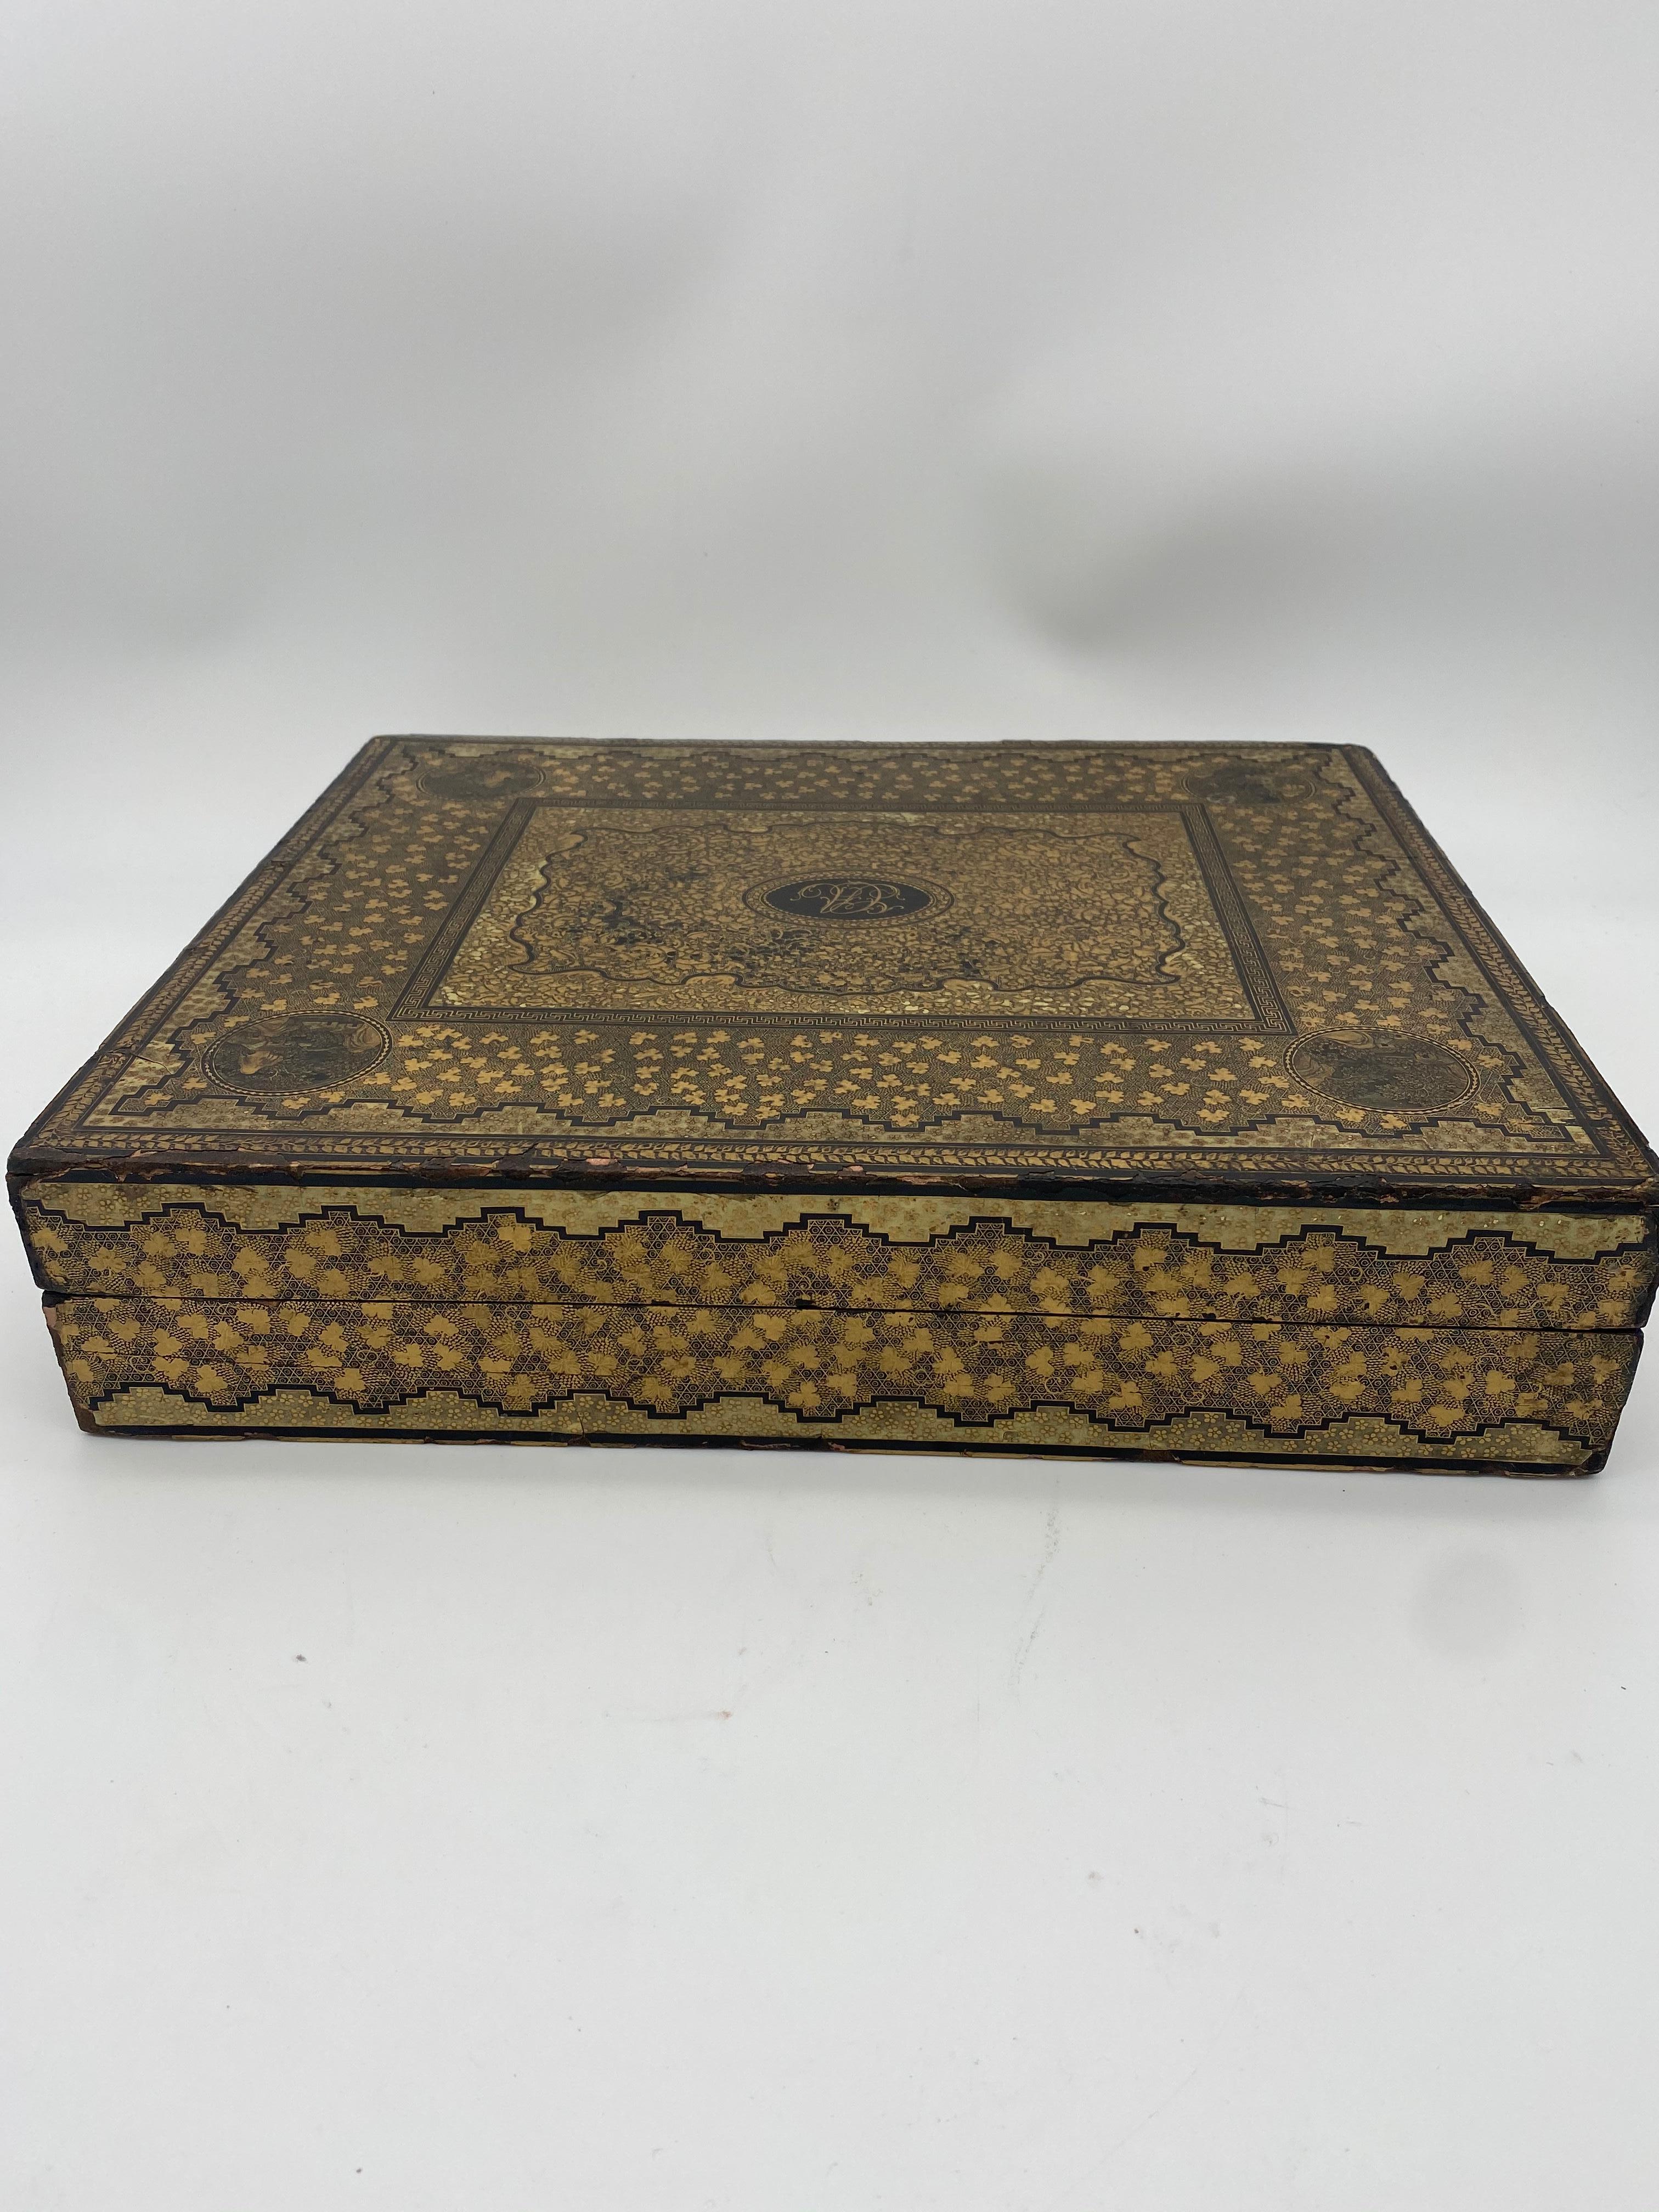 19th Century Chinese Gilt Lacquer Gambling Storage Box Trays and Dishes For Sale 2